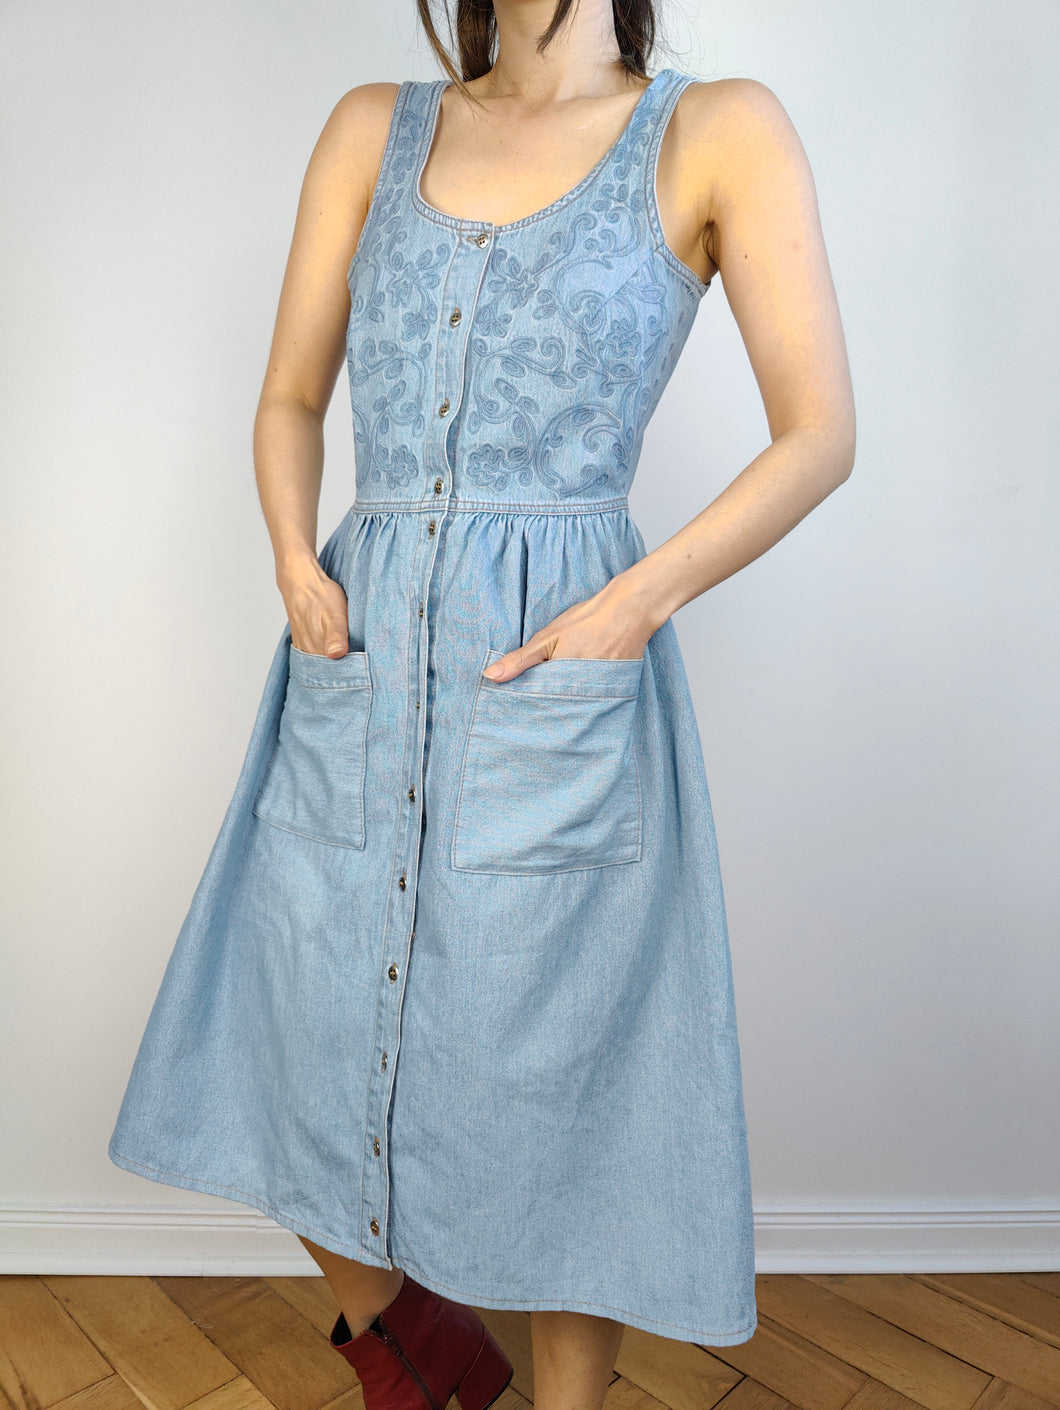 The Sleeveless Embroidery Denim Dress | Vintage light blue jeans embroidered spring summer midi XS